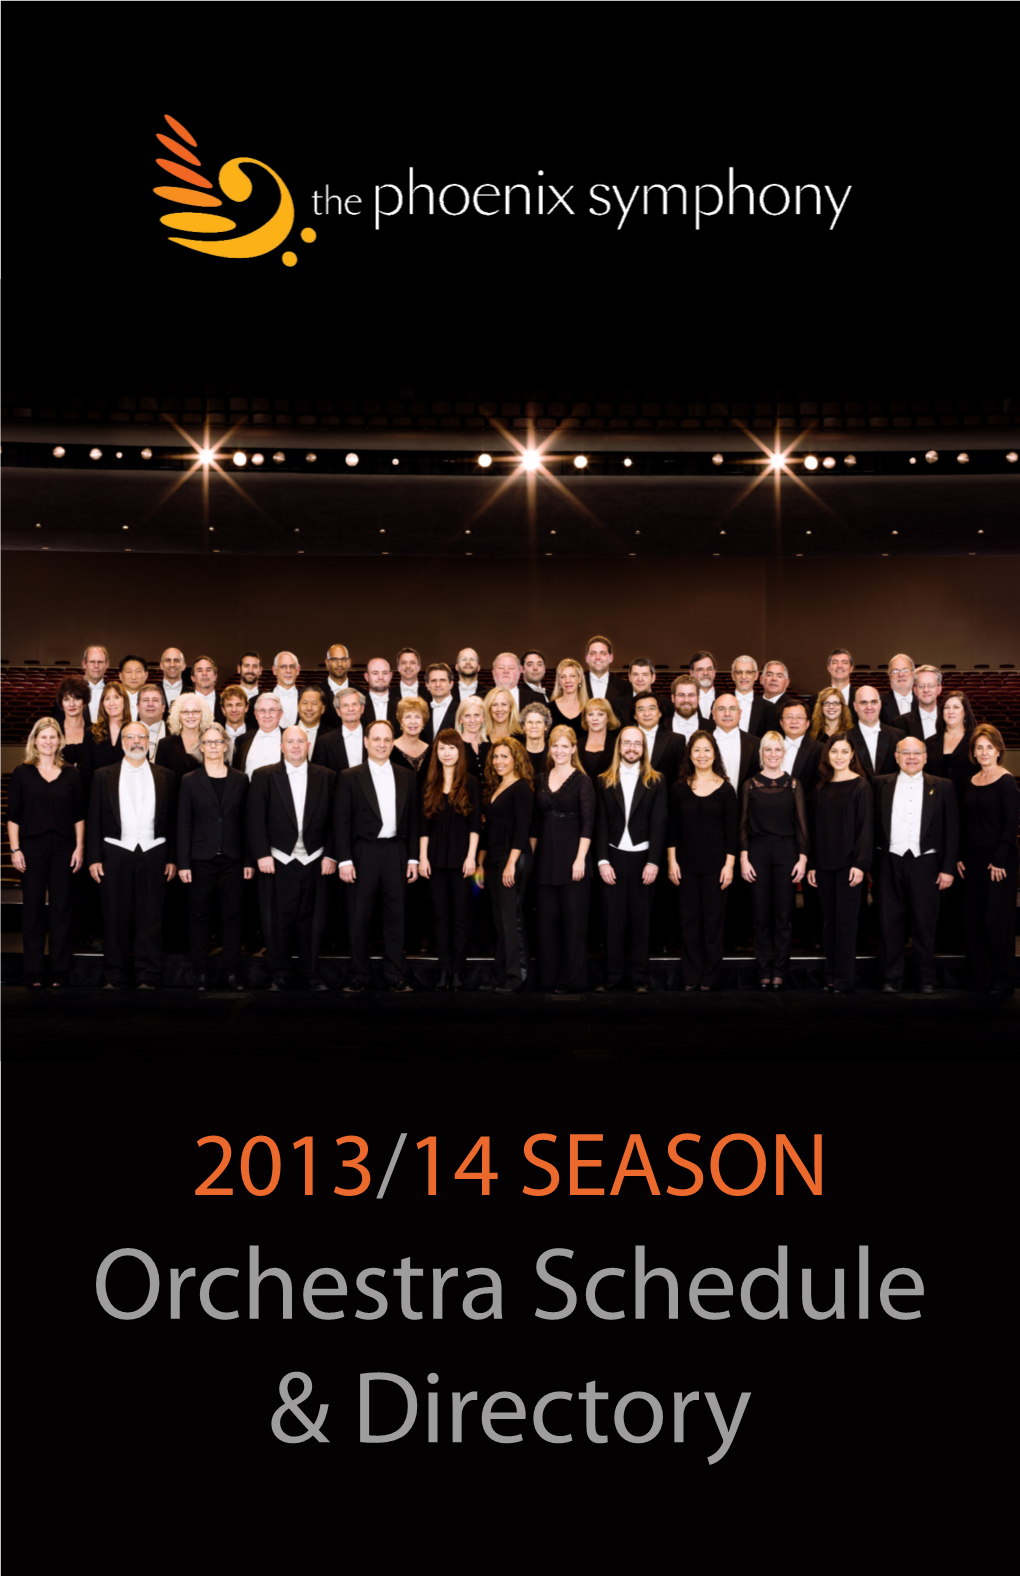 Orchestra Schedule & Directory